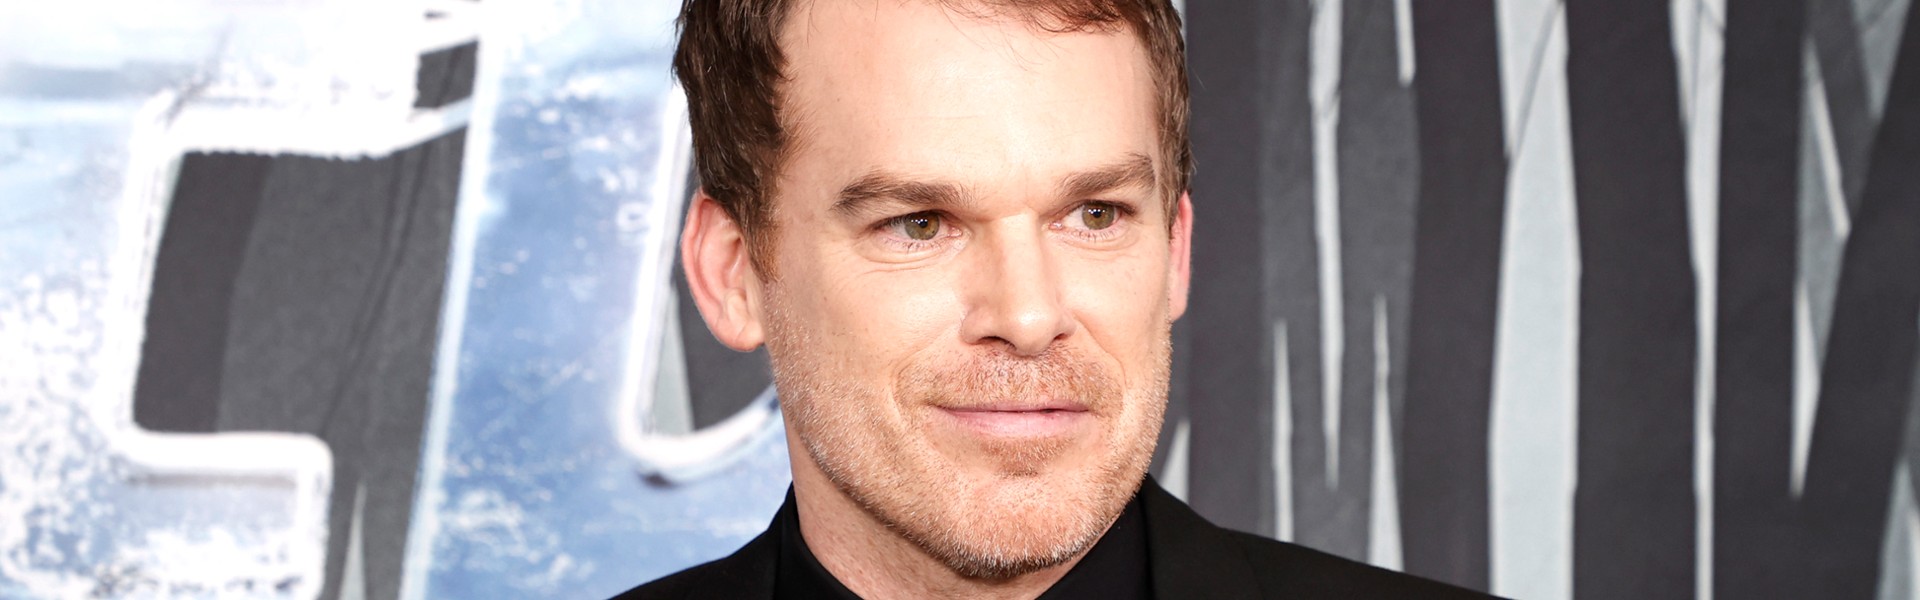 Michael C. Hall and Grace Caroline Currey are members of a cult. What do we know about “The Leader”?